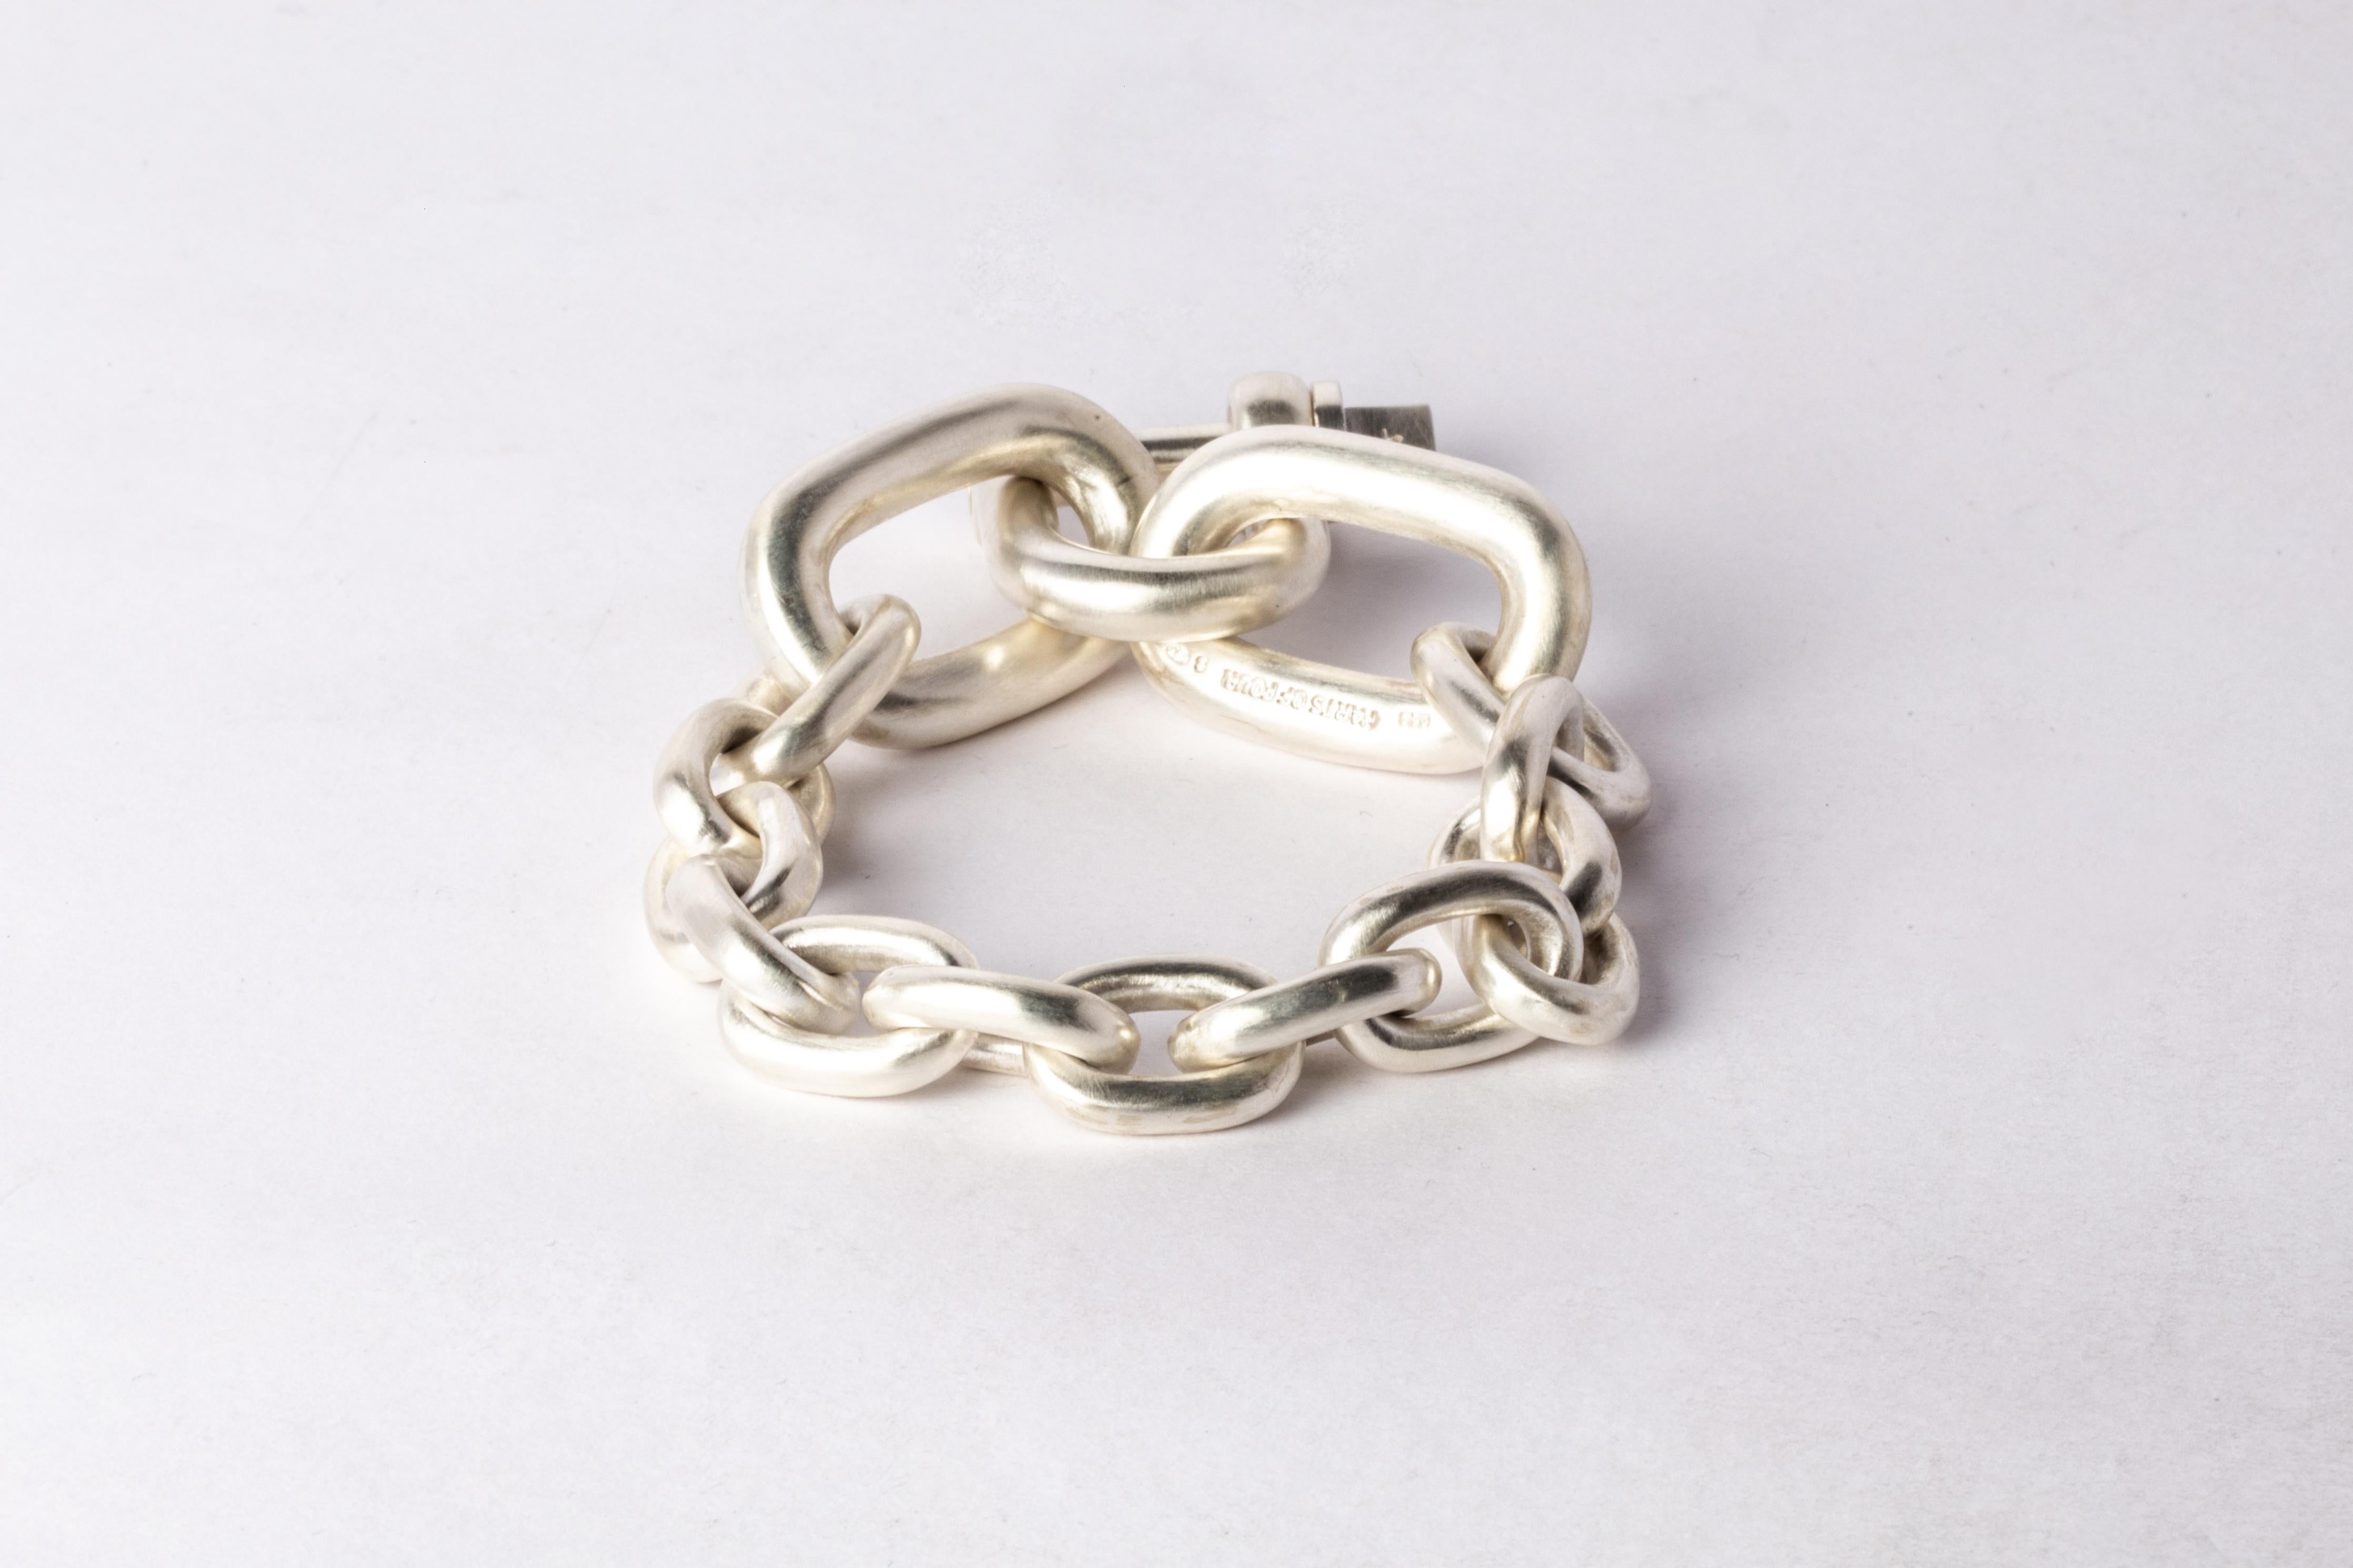 Bracelet in matte sterling silver. The Charm System is an interrelated group of products that can be mixed and matched or worn individually.
Dimensions:
Chain link size (L × H): 17 mm × 13 mm
End link size (L × H): 33 mm × 22 mm
U-bolt (H × W): 35